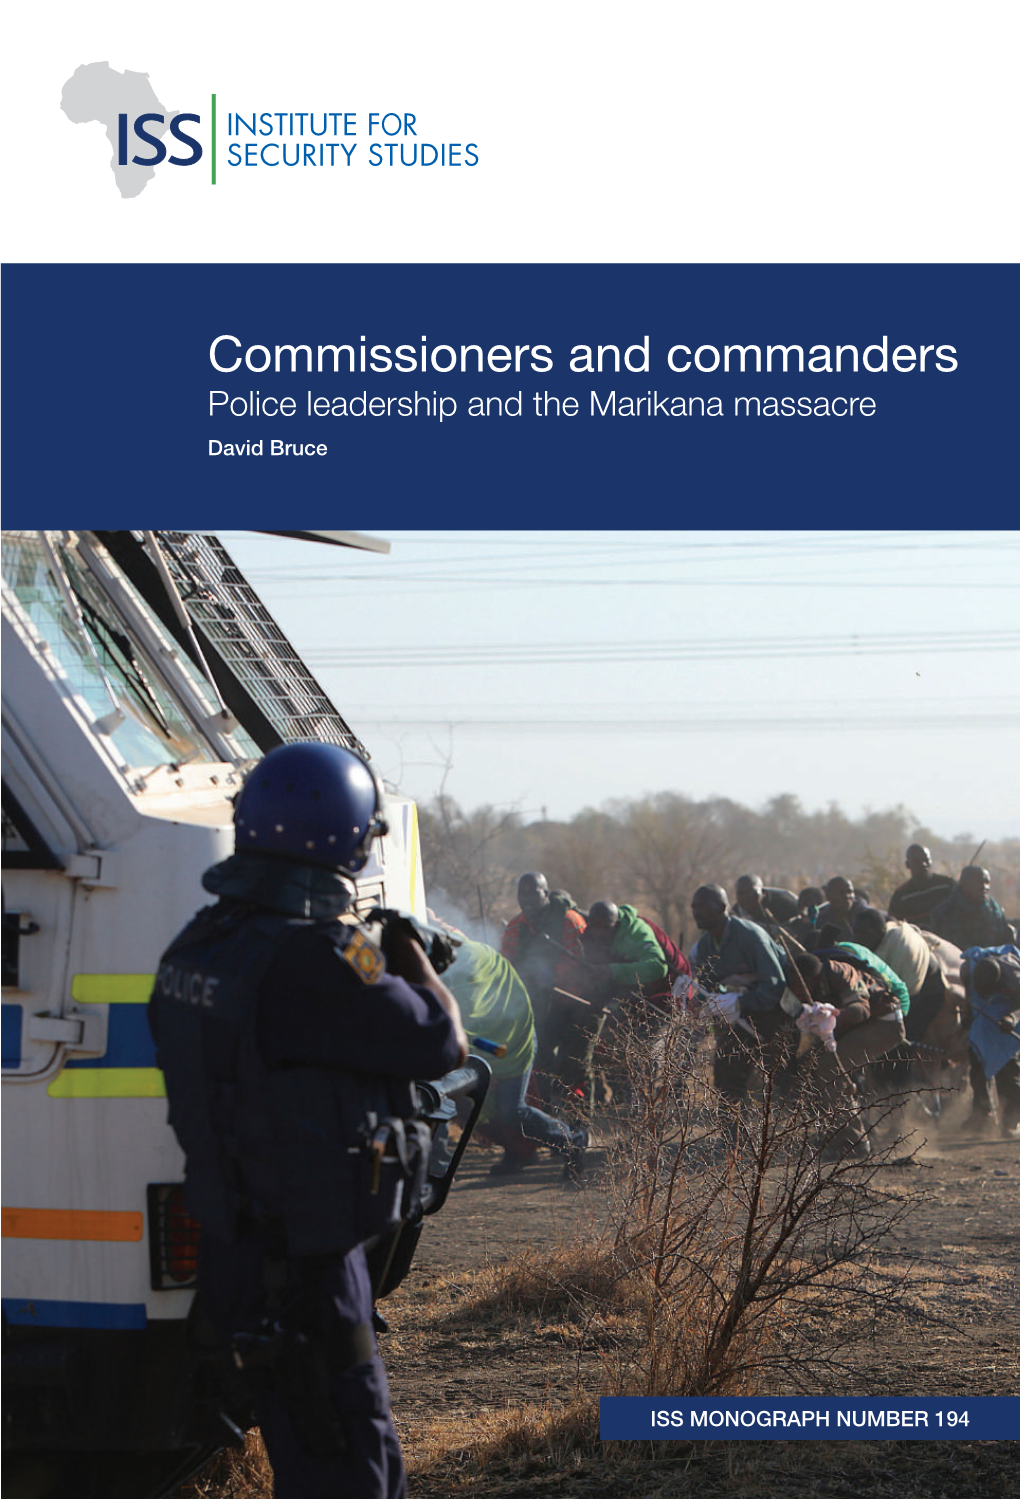 Commissioners and Commanders and the Exercise of Authority and Influence by the Senior Police Leadership and the Marikana Massacre Leadership of the SAPS